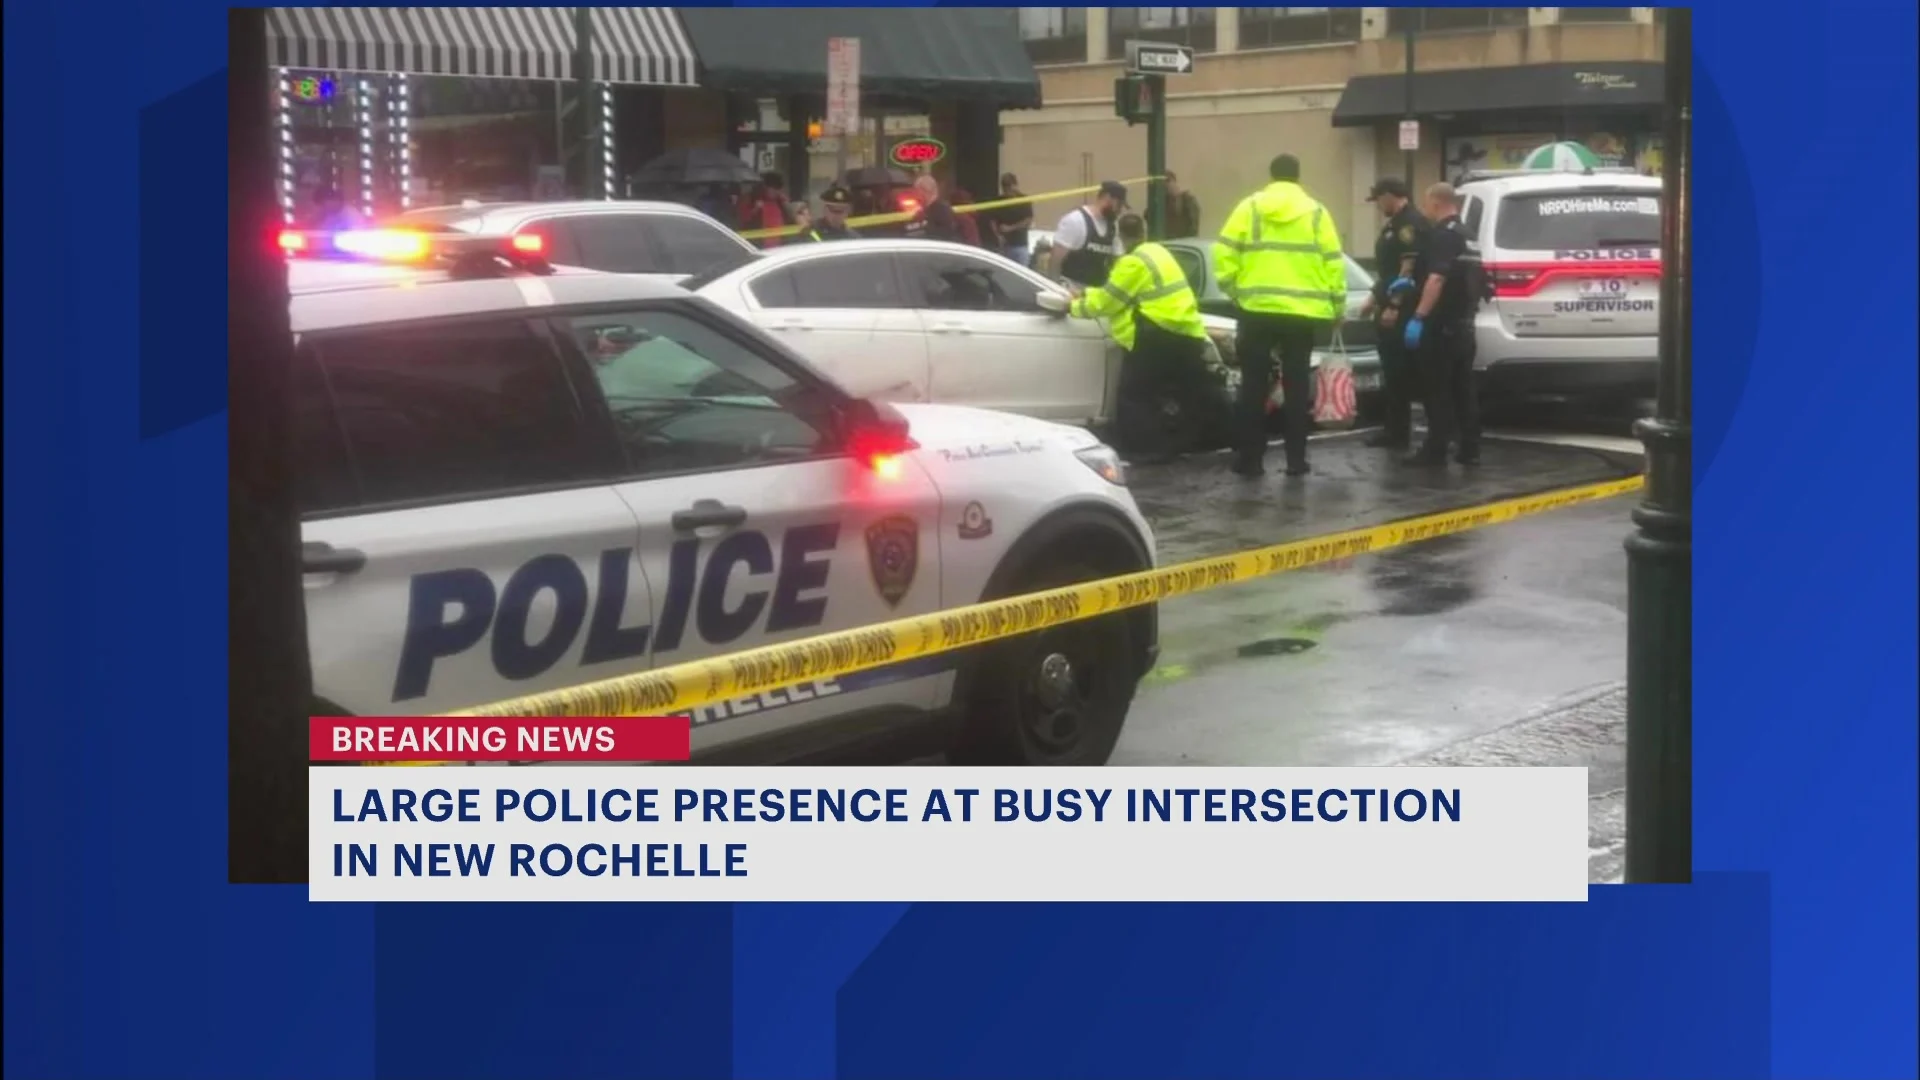 Large police presence descends at busy New Rochelle intersection